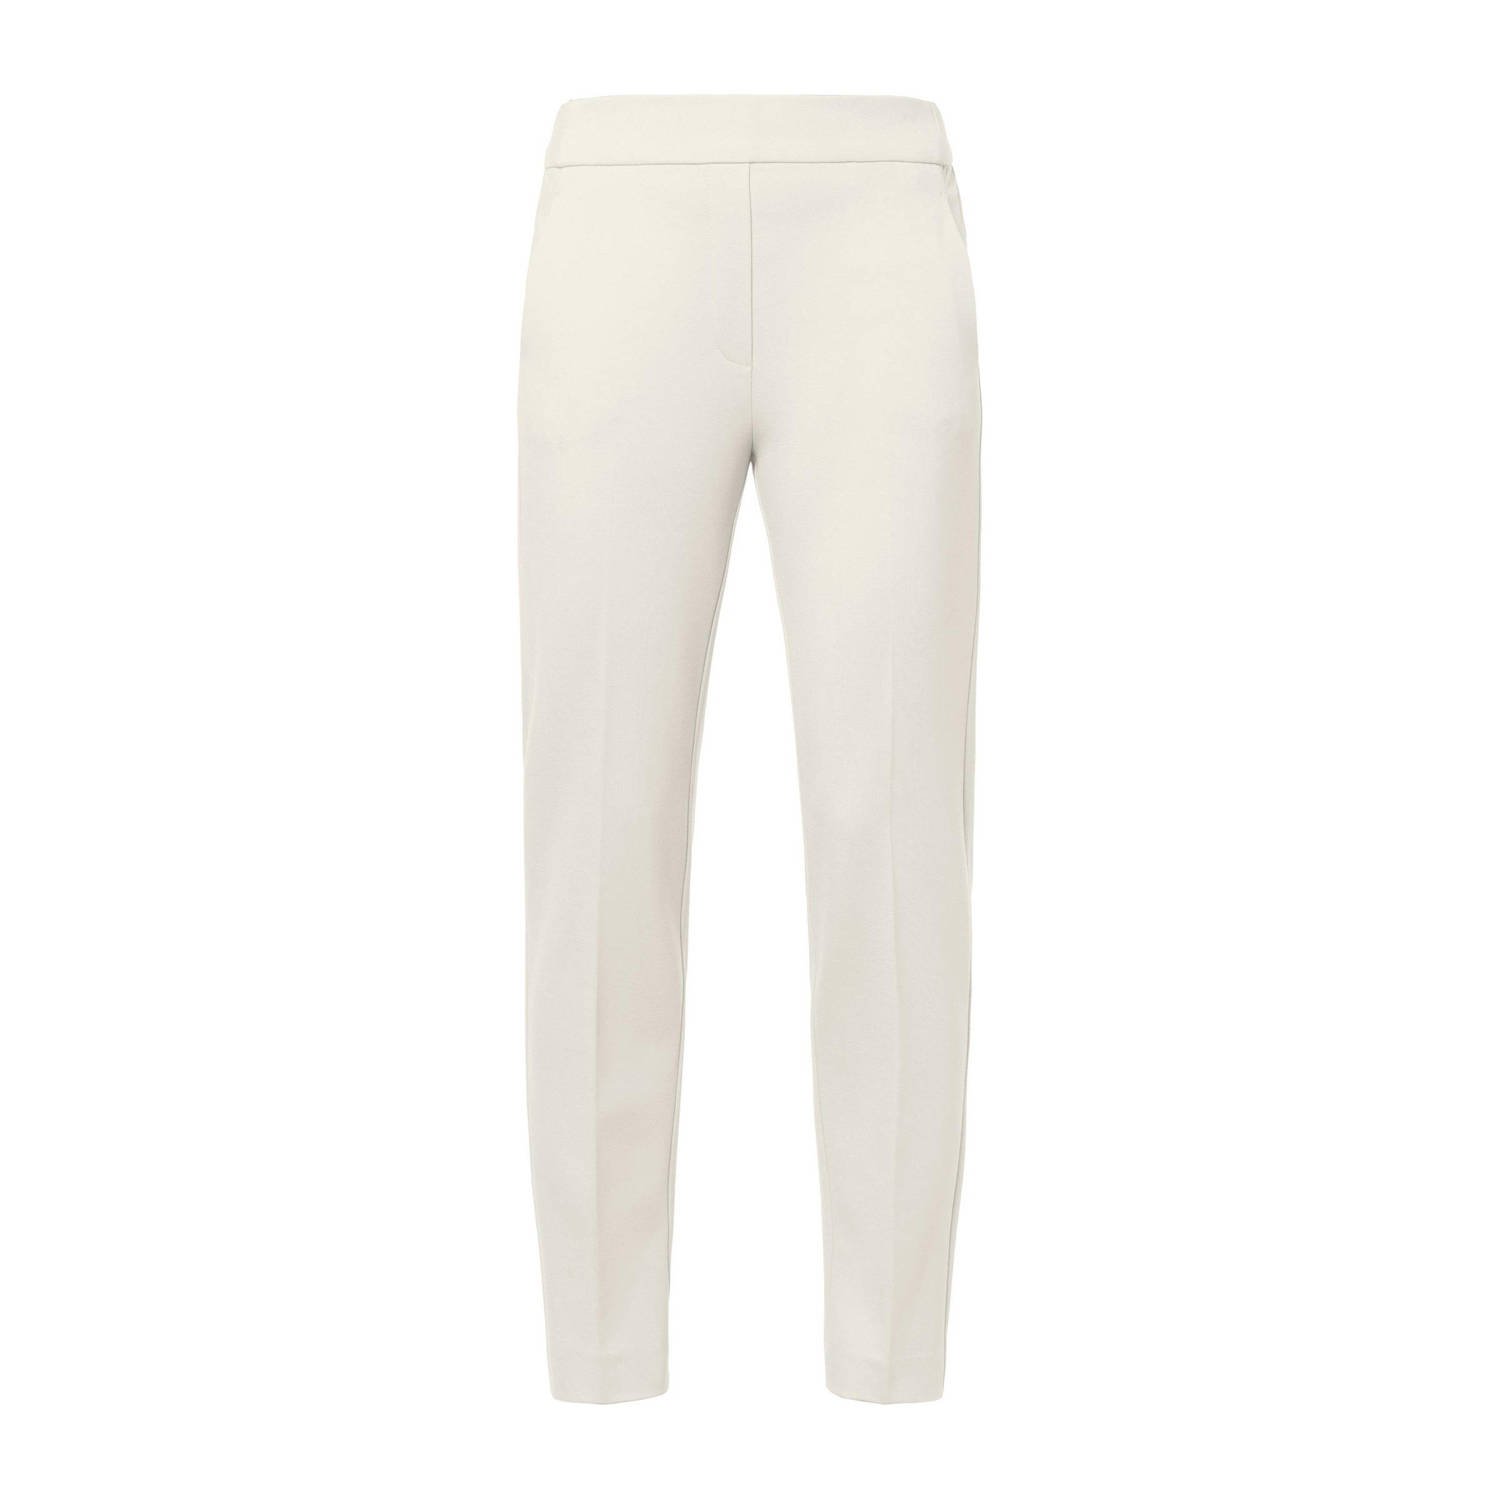 Beaumont cropped slim fit chino Charlie offwhite